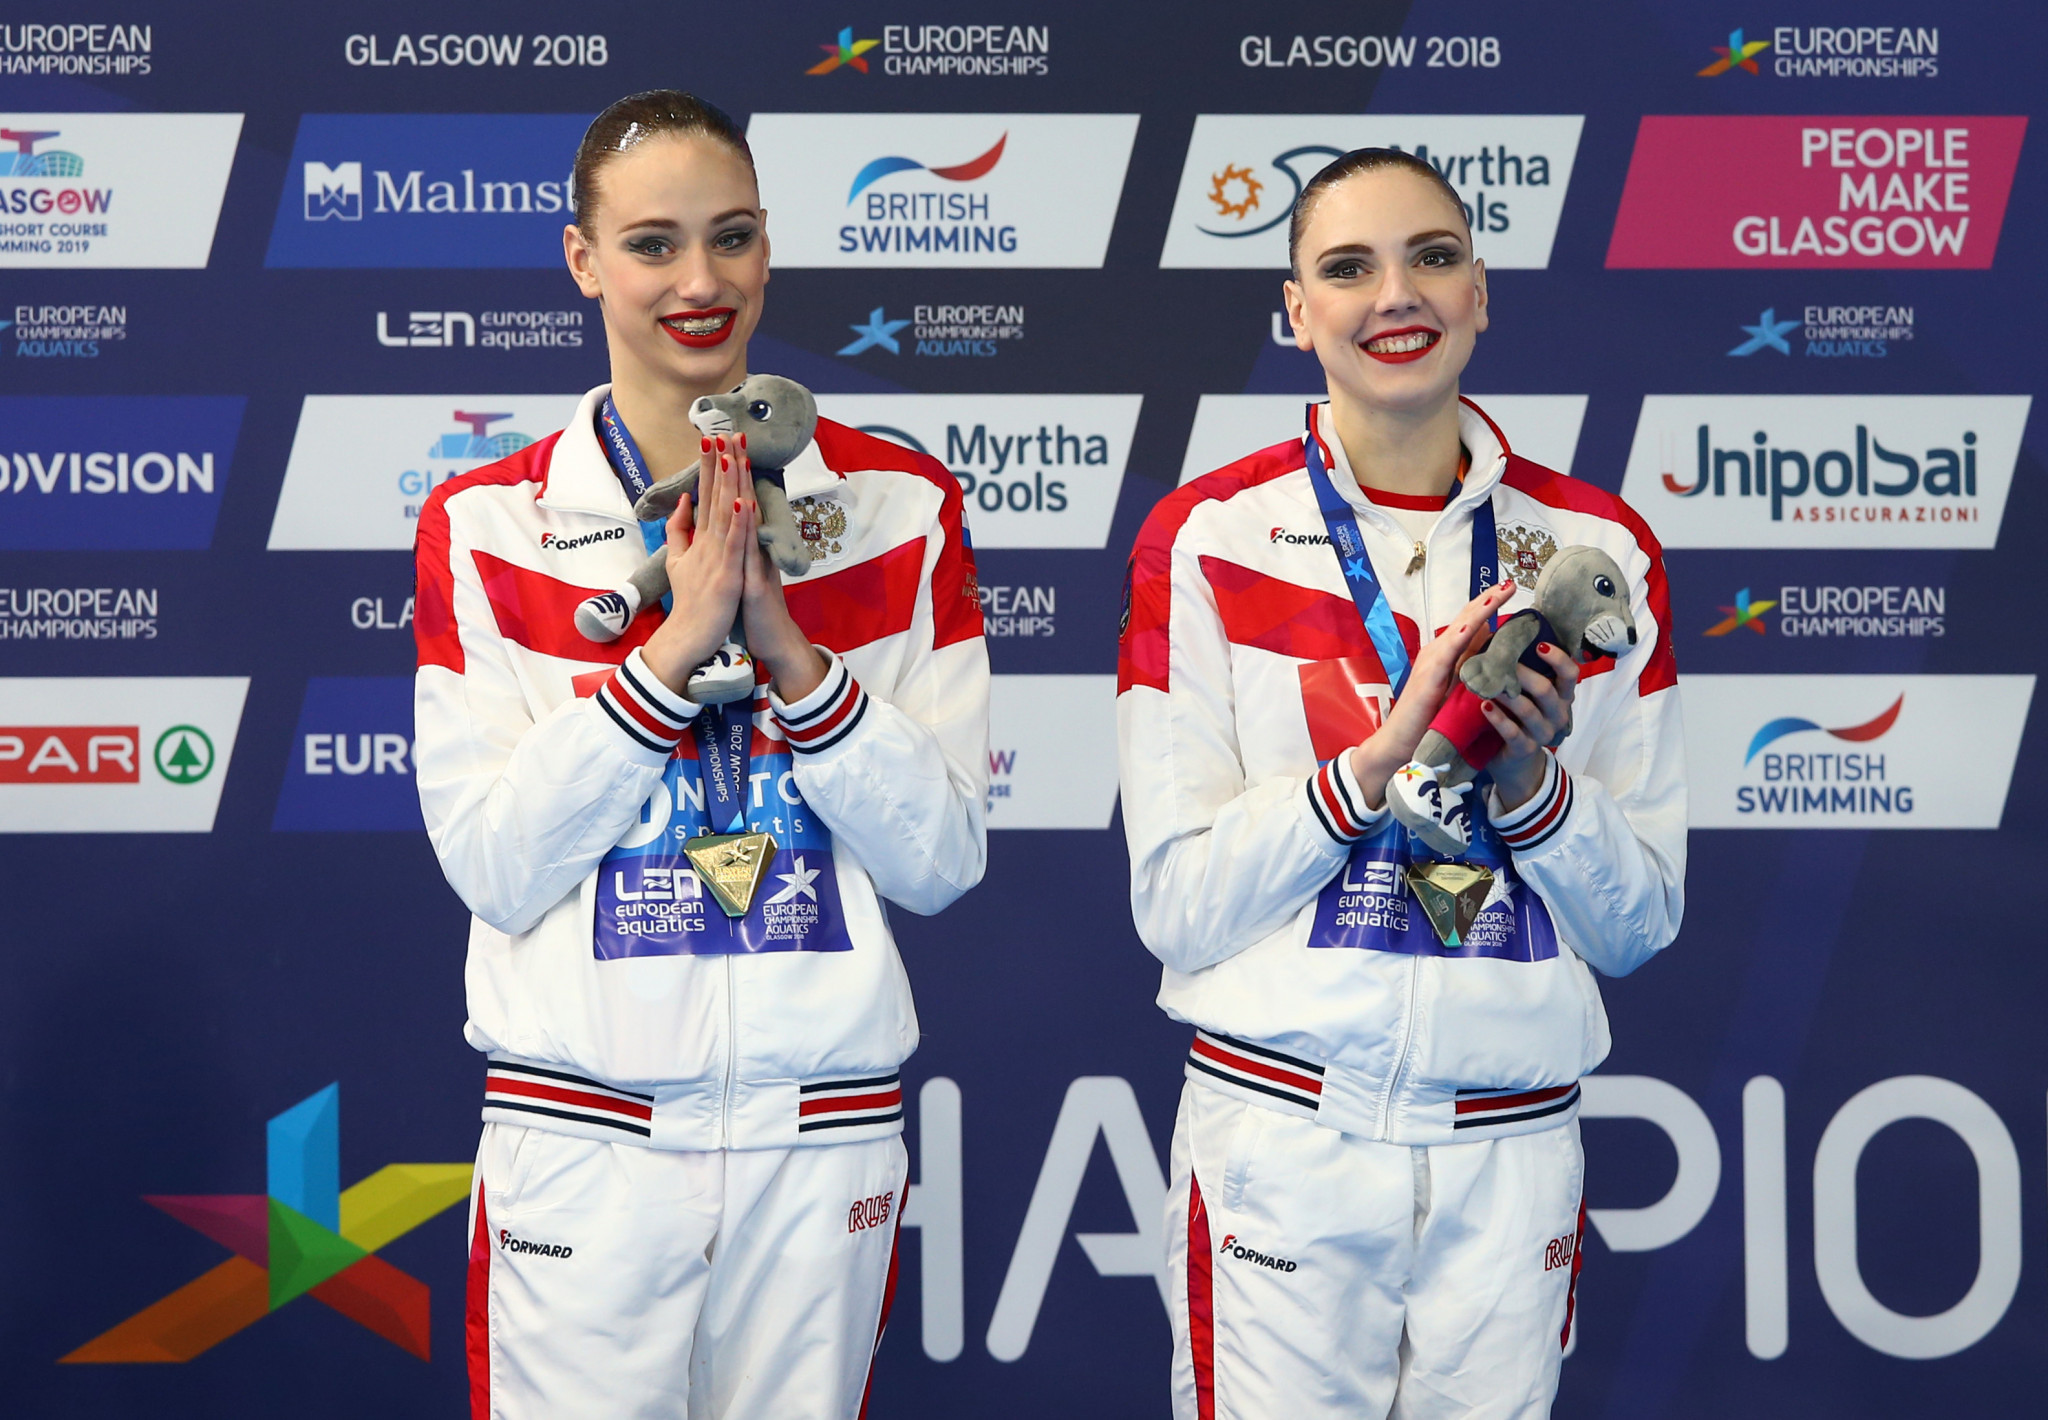 Russia live up to expectations in artistic swimming to secure first two gold medals at Glasgow 2018 European Championships